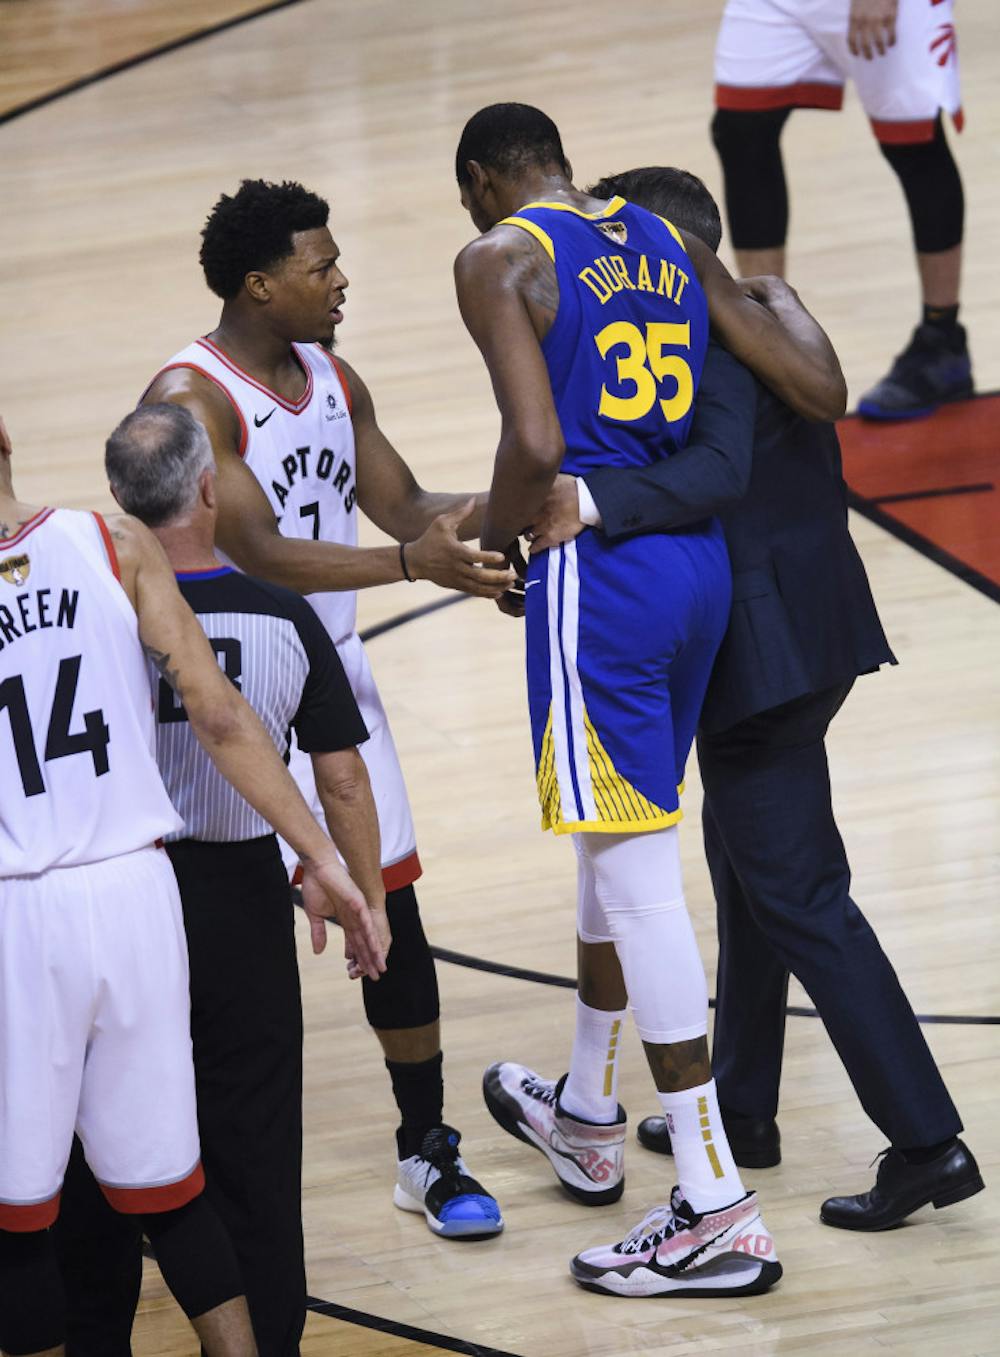 <p><span id="docs-internal-guid-8c1be220-7fff-b0a5-0f1e-6b128a534dc4"><span>Warriors small forward Kevin Durant limps off the court after rupturing his Achilles in Game 5 of the NBA Finals on Monday night.</span></span></p>